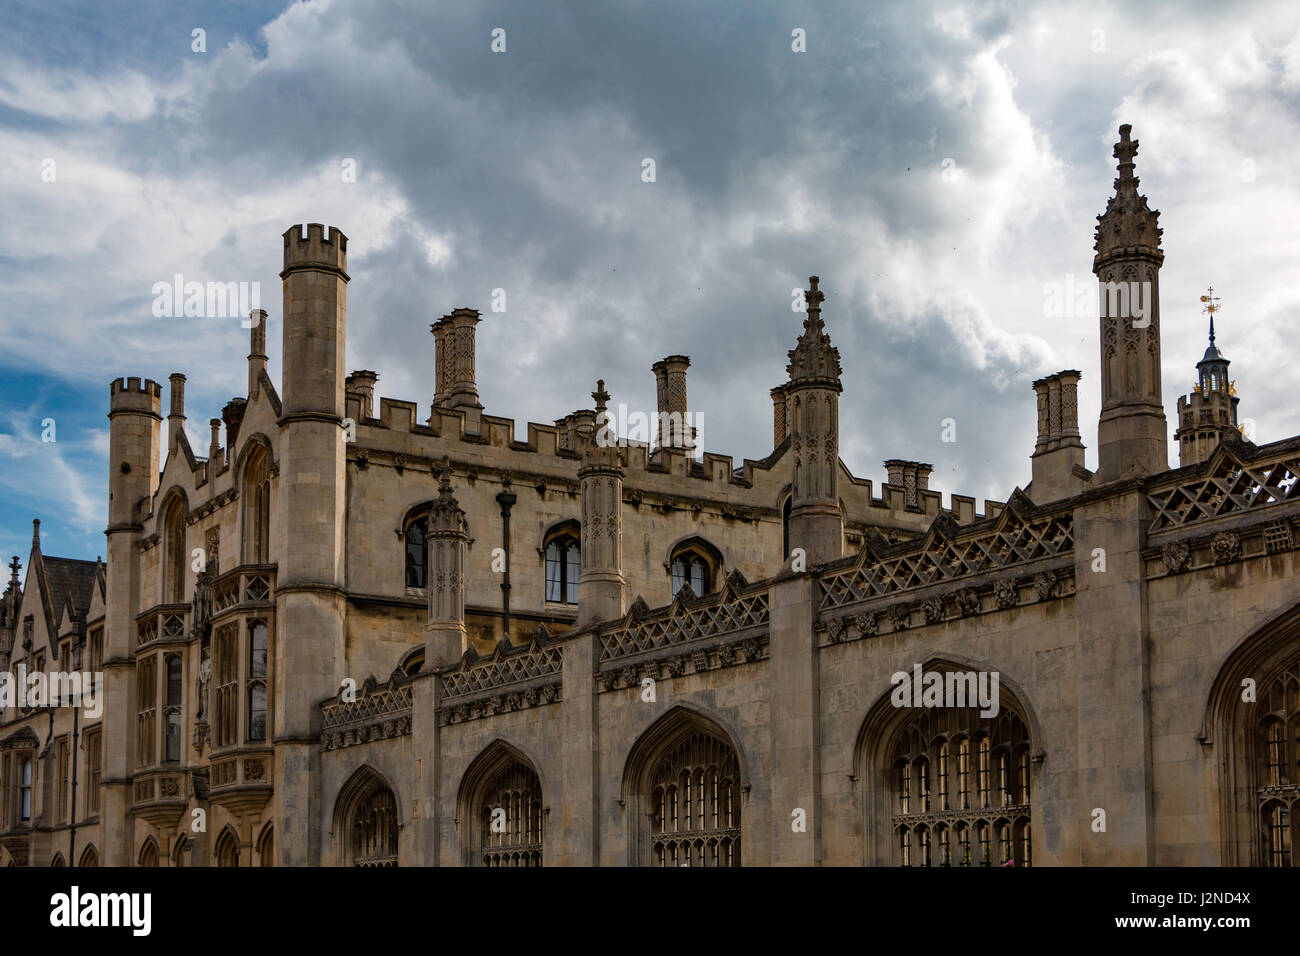 King's College, University of Cambridge on a cloudy day Stock Photo